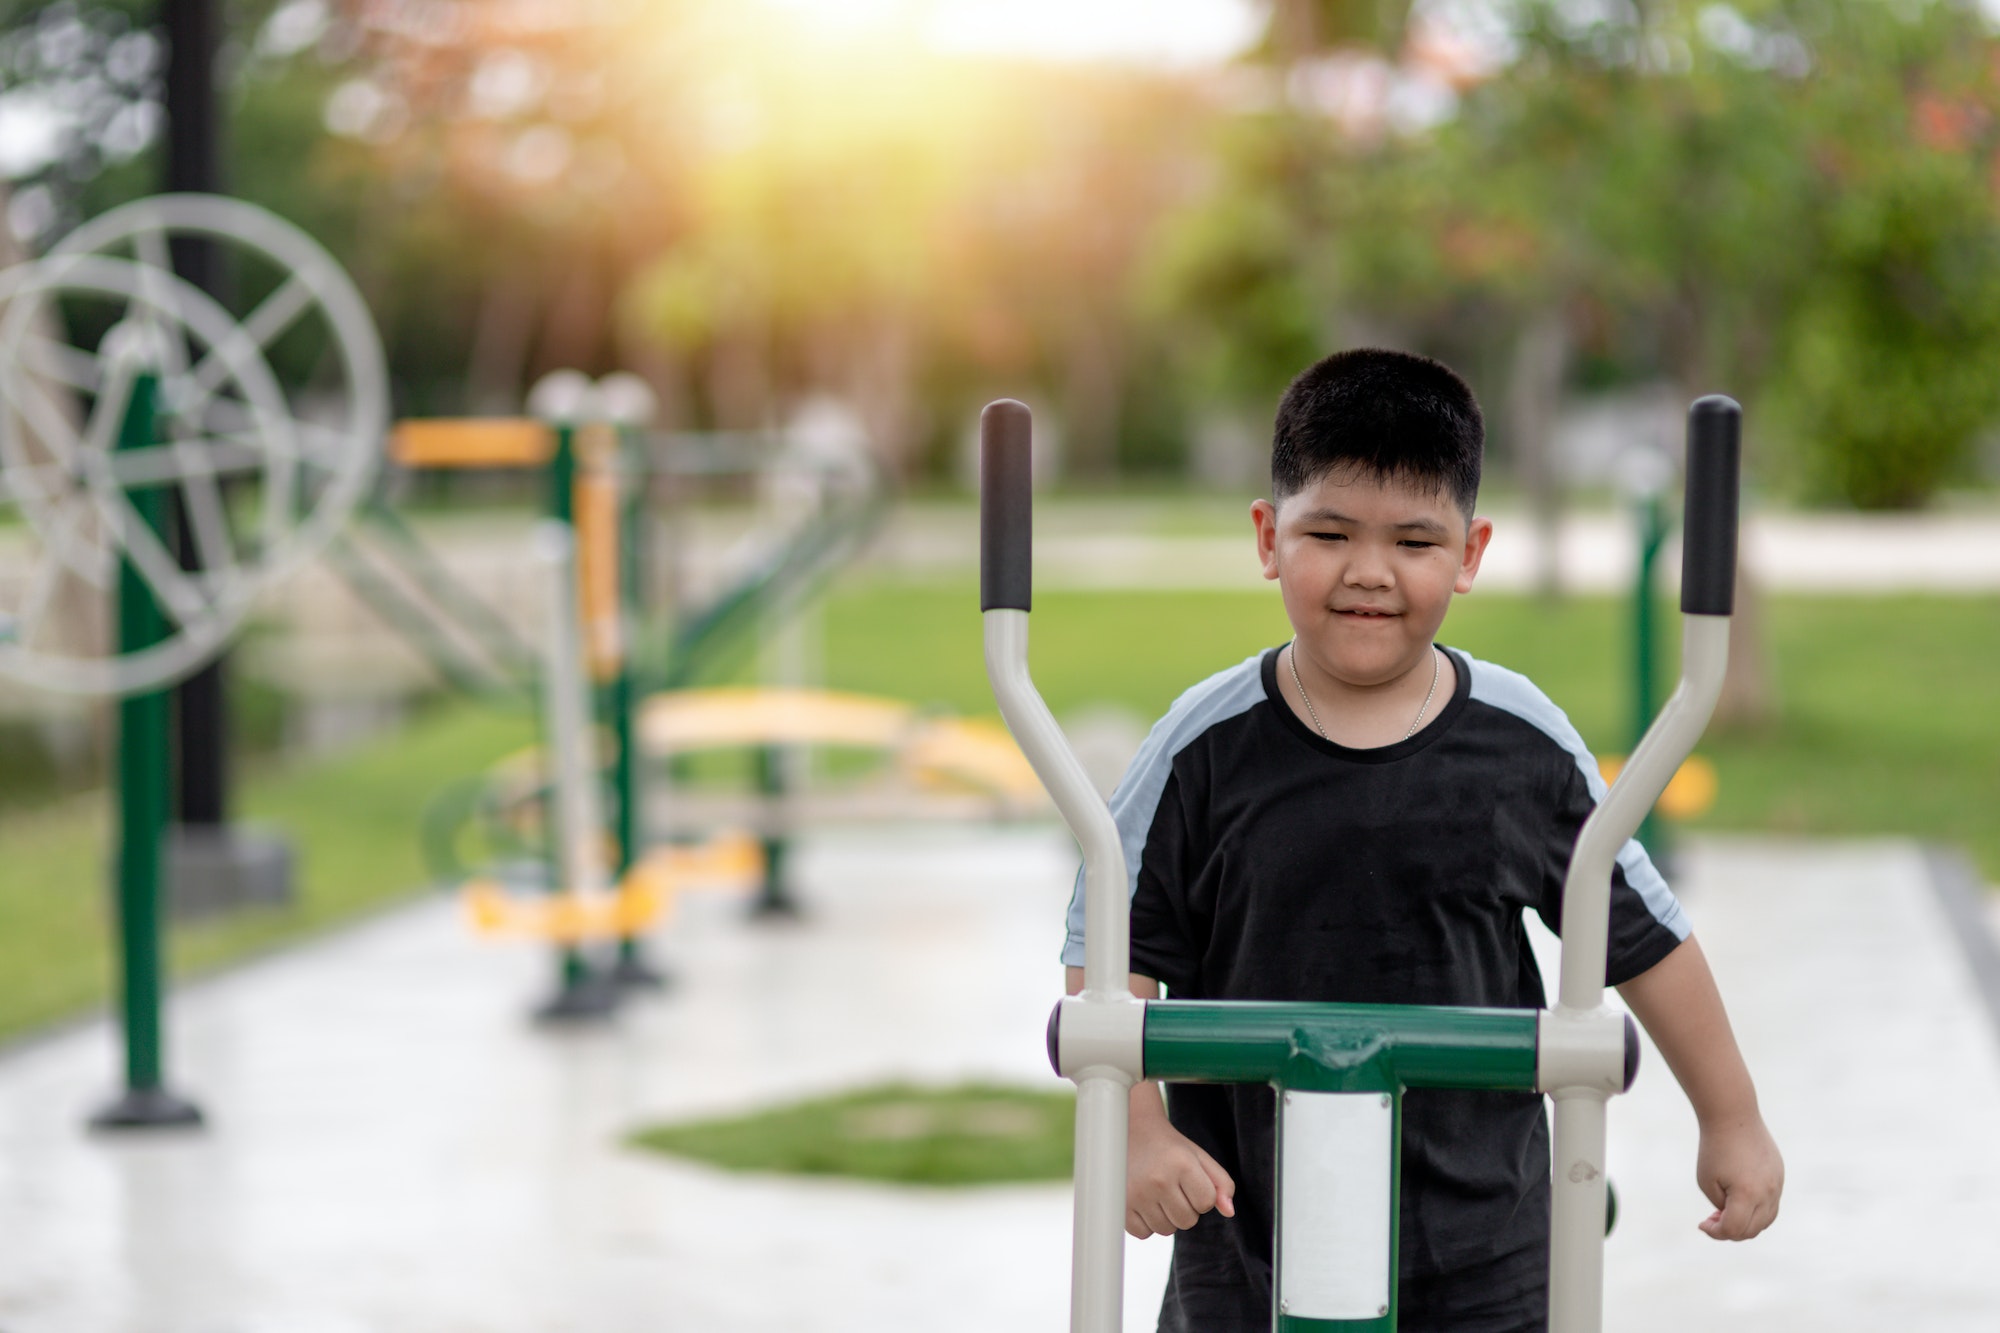 fat boy trains on fitness equipment in the park